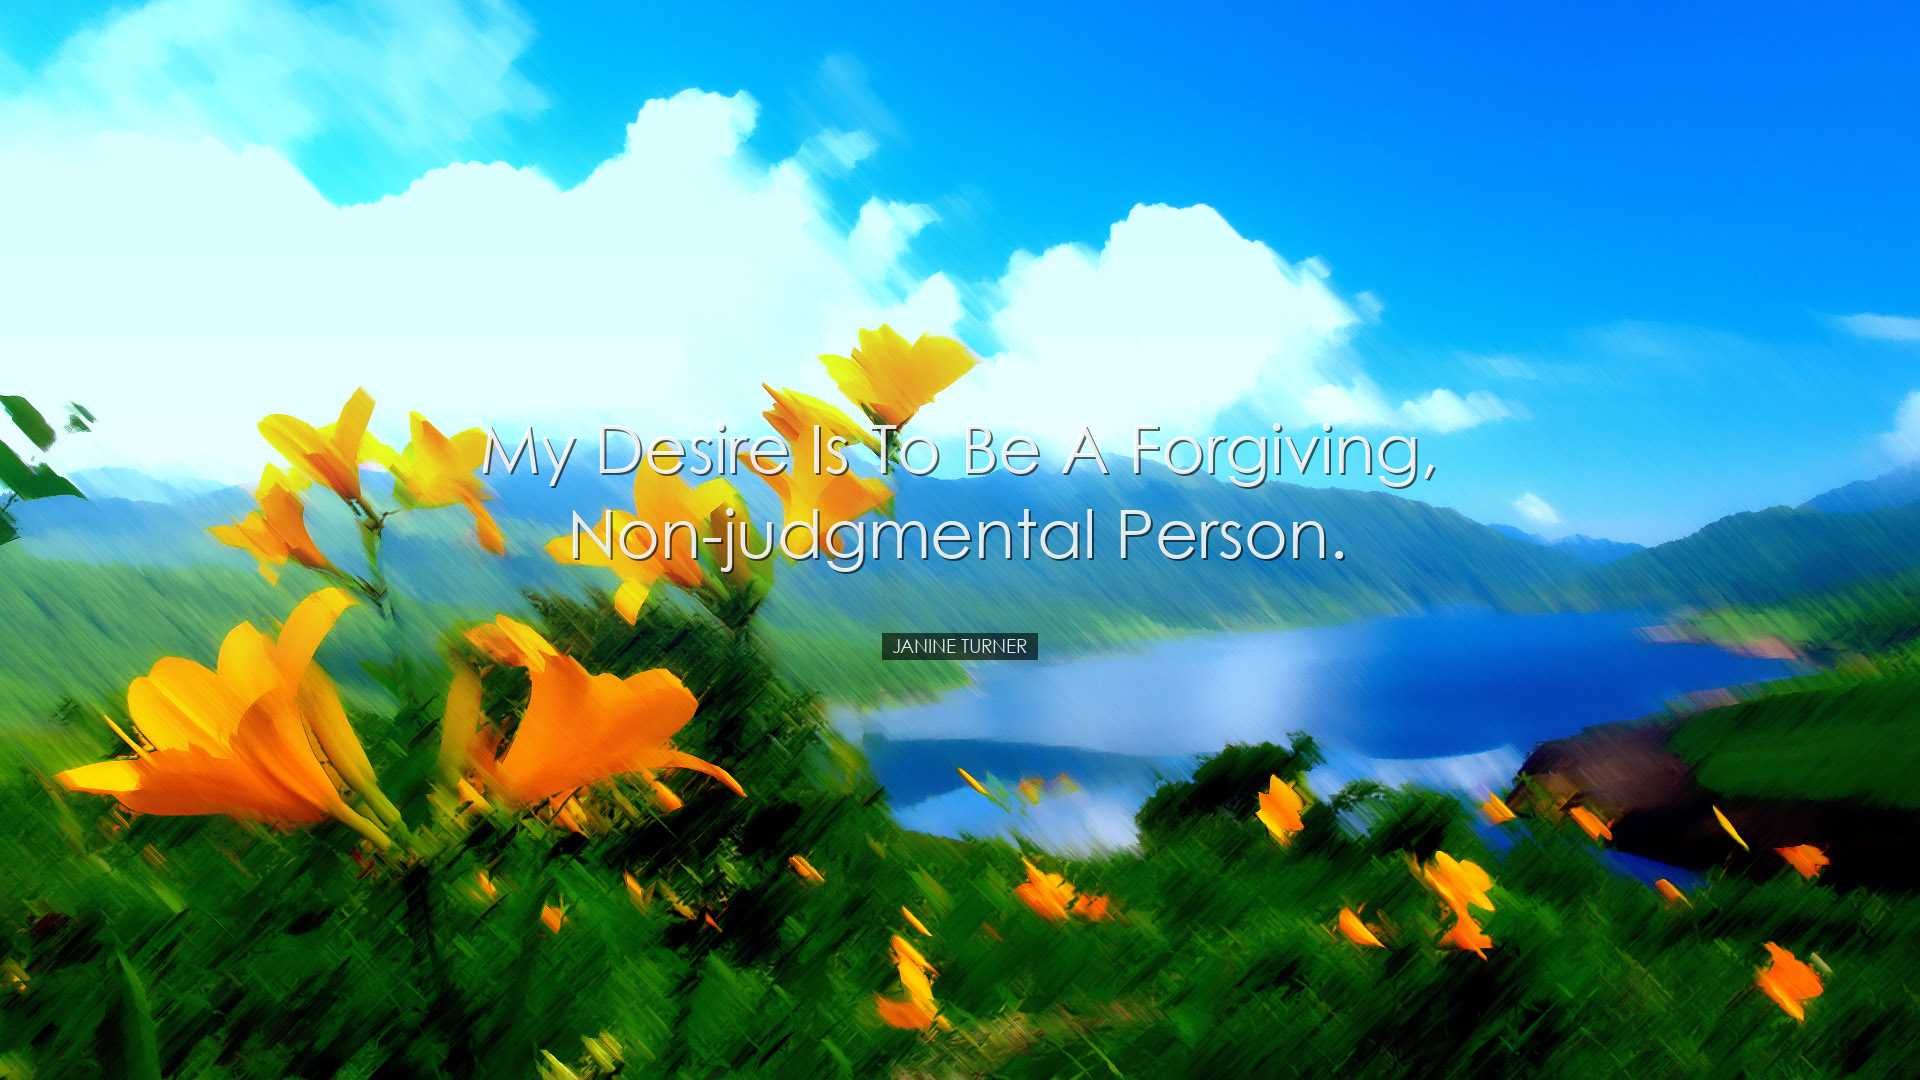 My desire is to be a forgiving, non-judgmental person. - Janine Tu